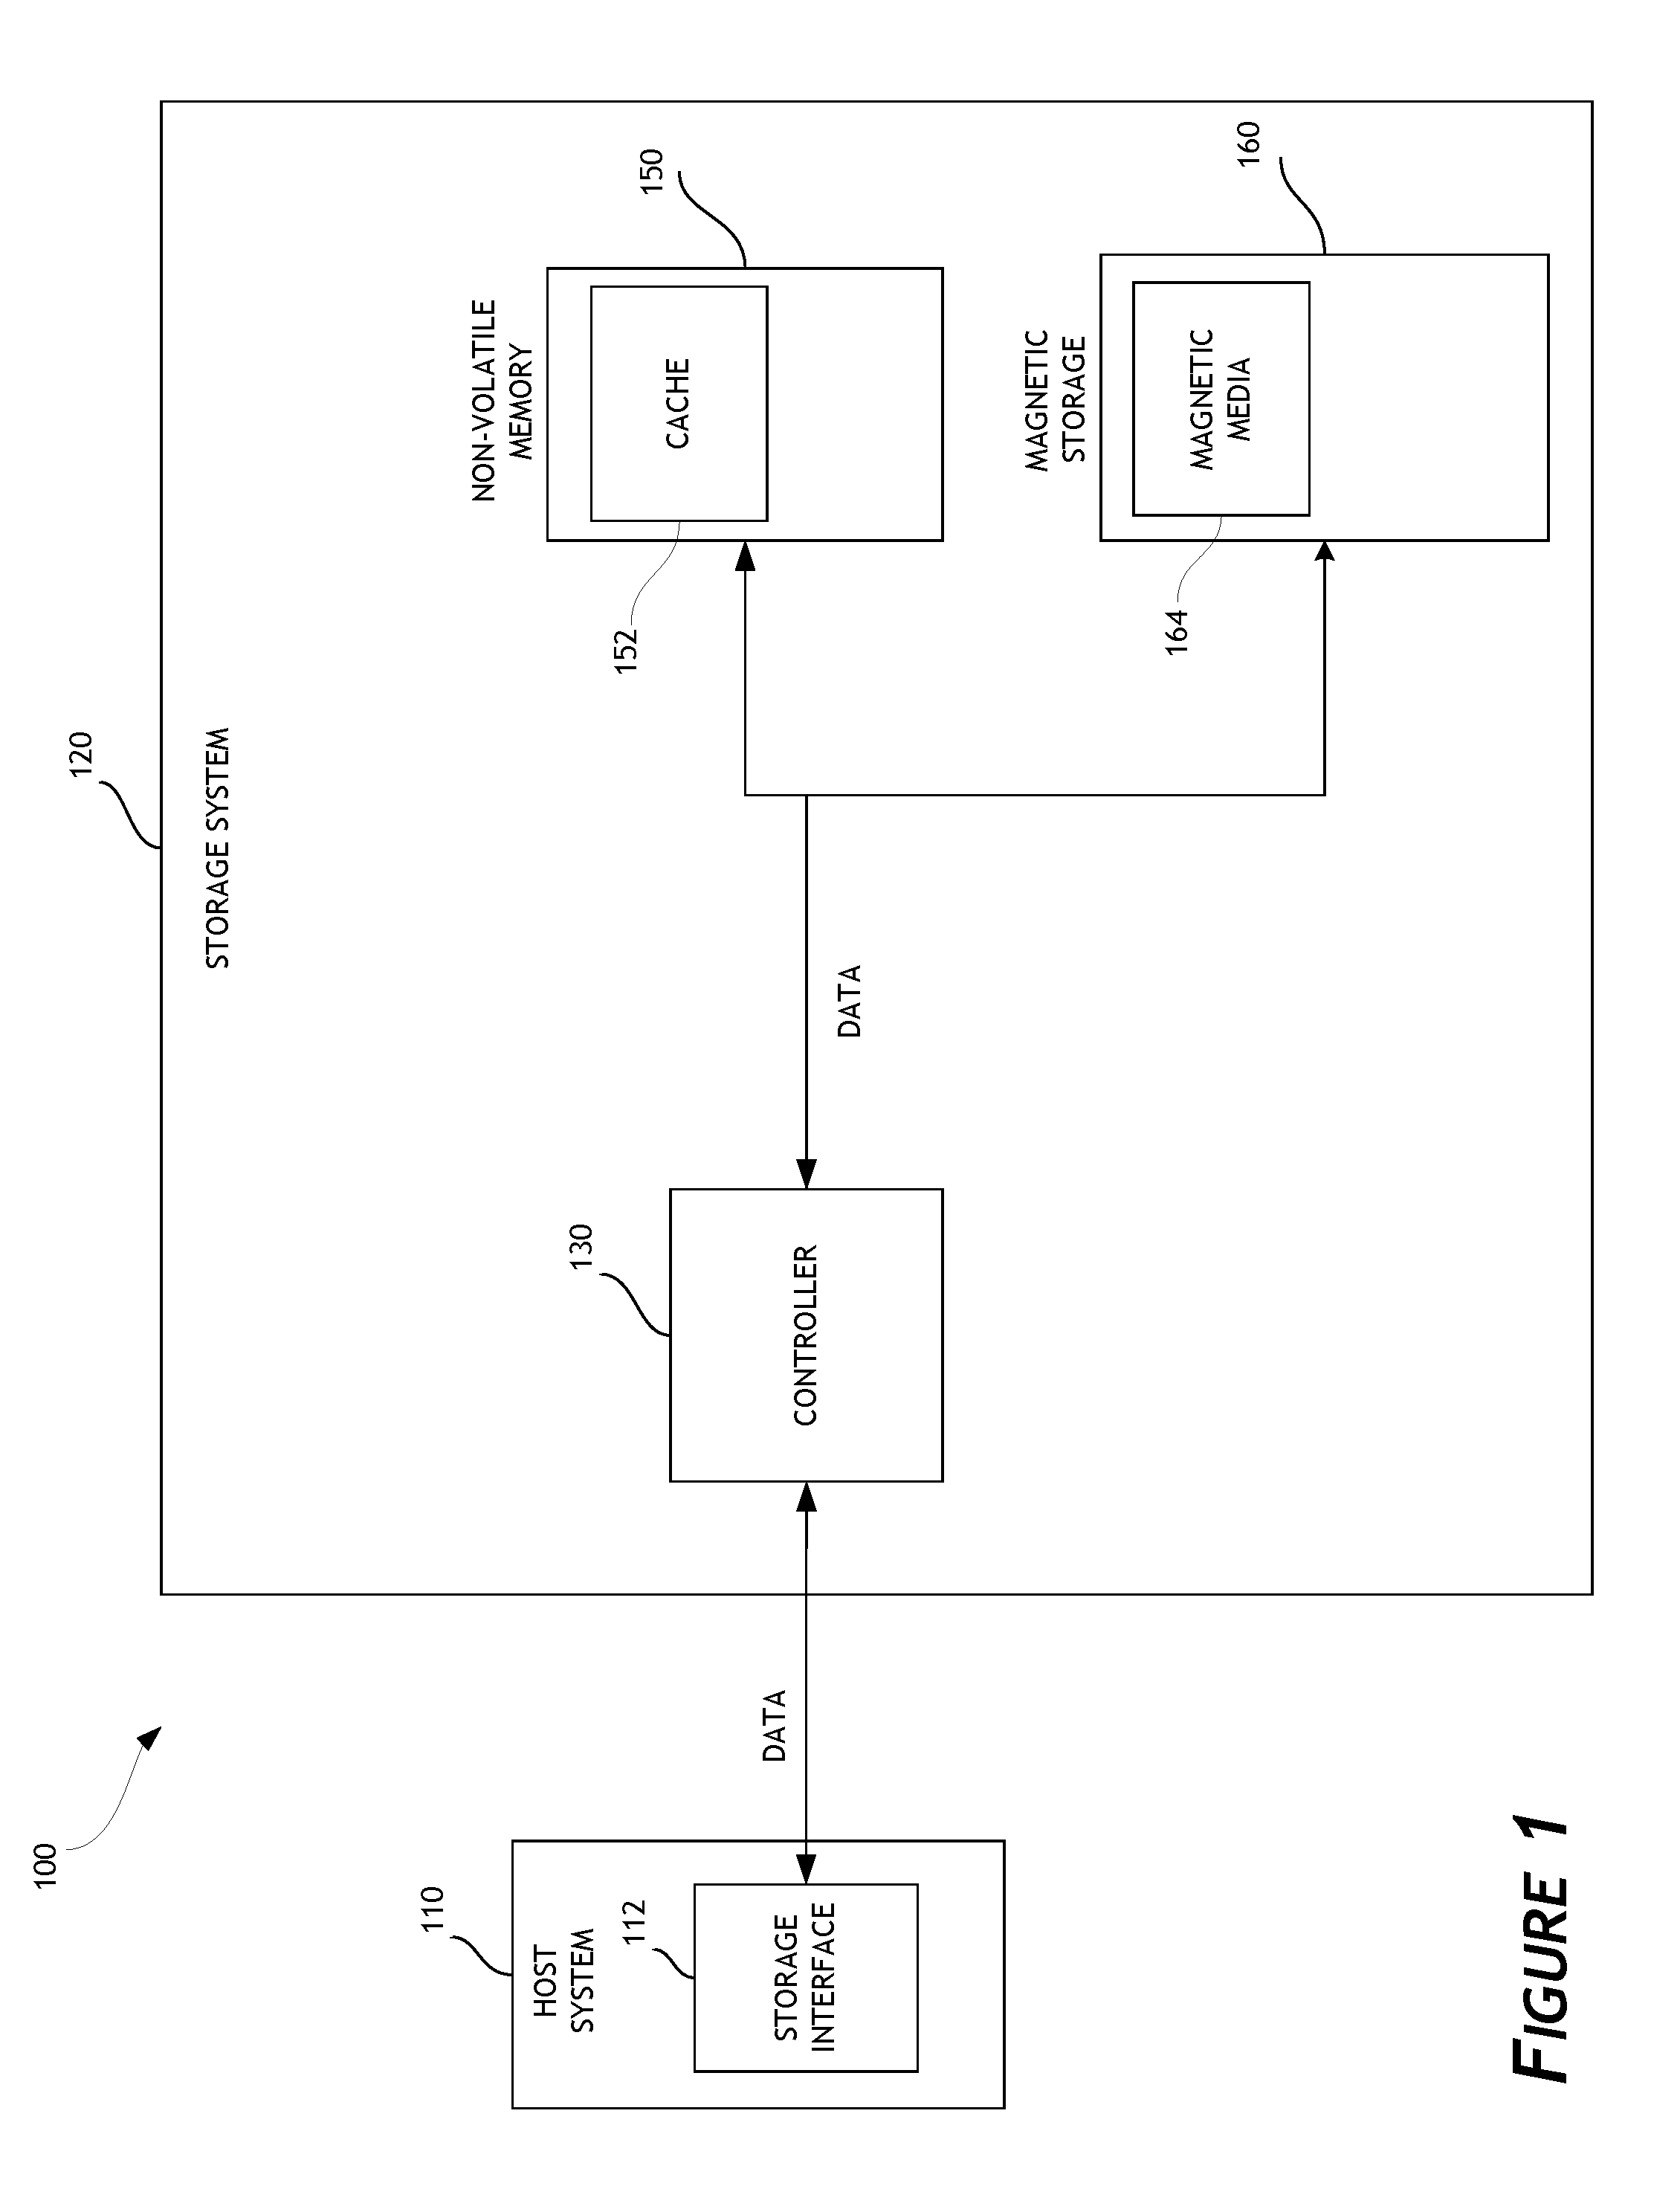 Caching of data in data storage systems by managing the size of read and write cache based on a measurement of cache reliability